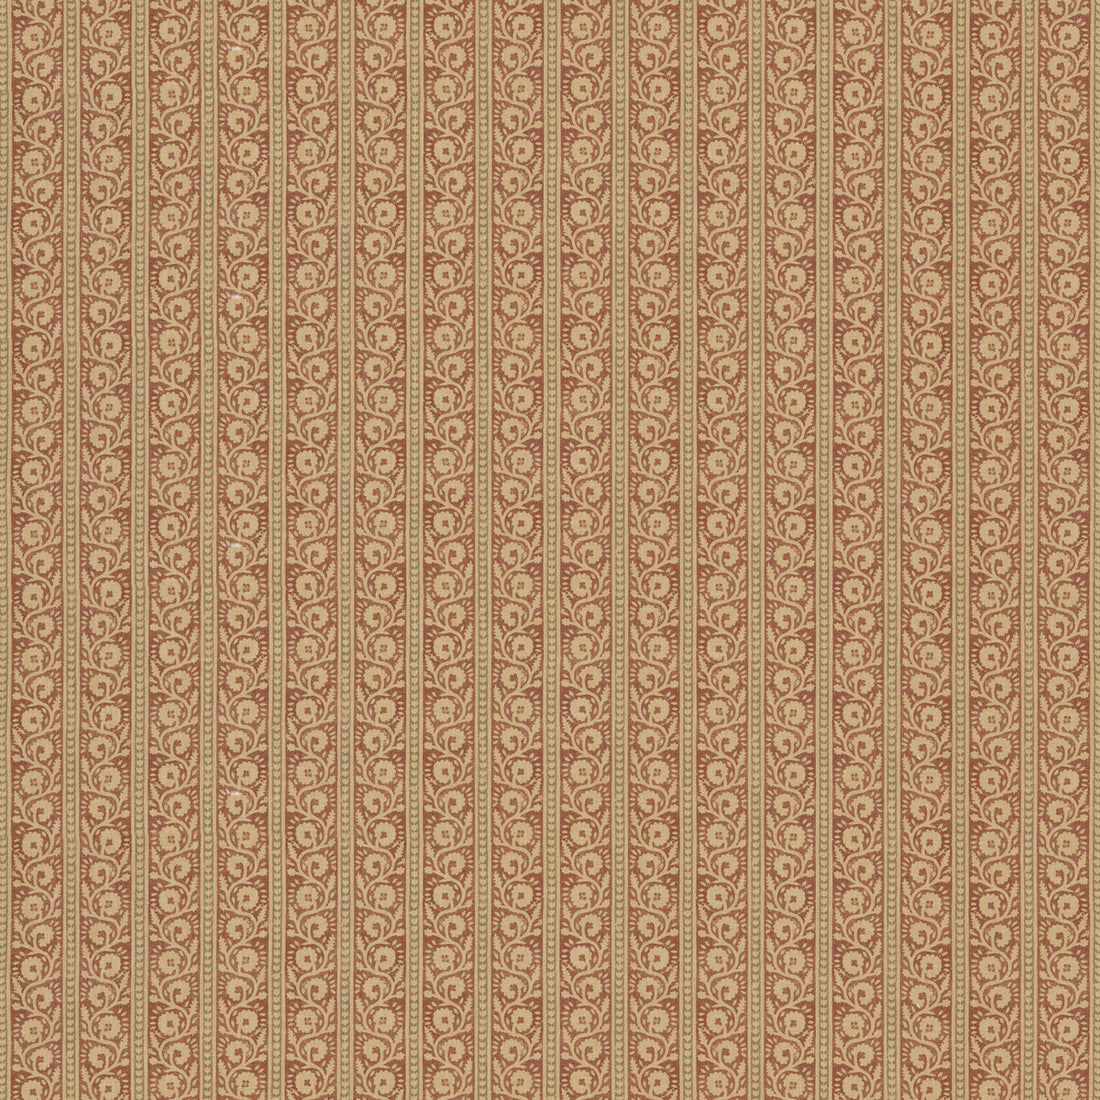 Bibury fabric in red/olive color - pattern BP10999.7.0 - by G P &amp; J Baker in the House Small Prints collection